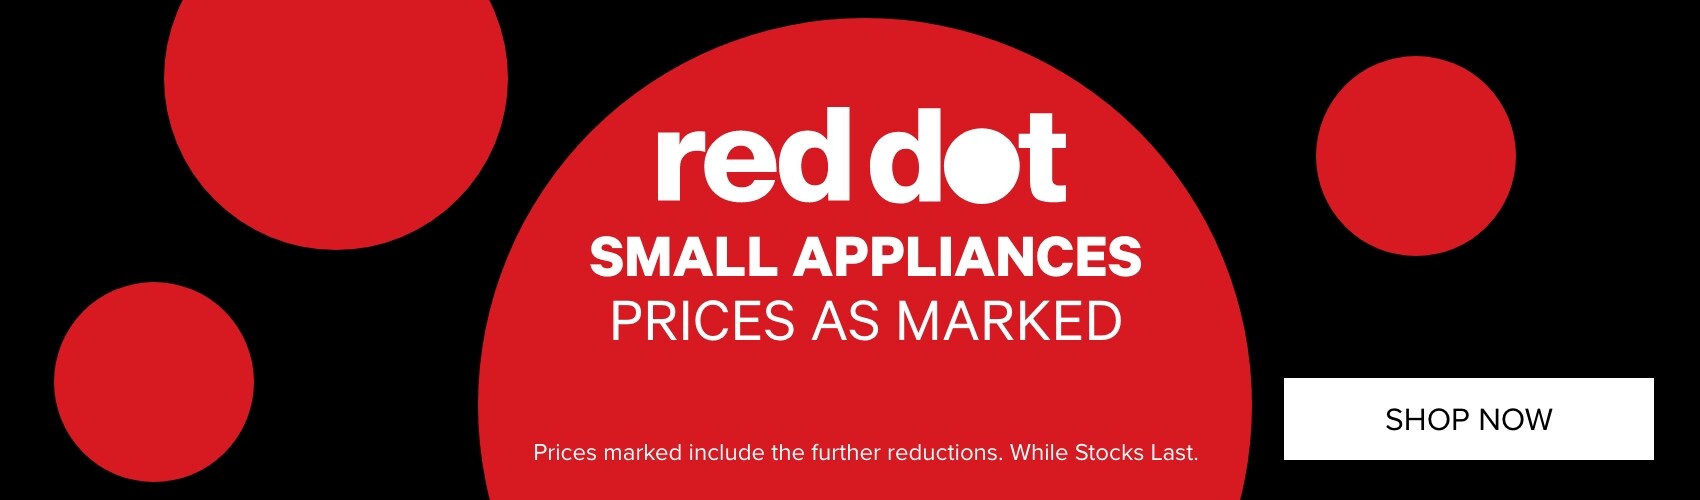 Red Dot SMALL APPLIANCES PRICES AS MARKED